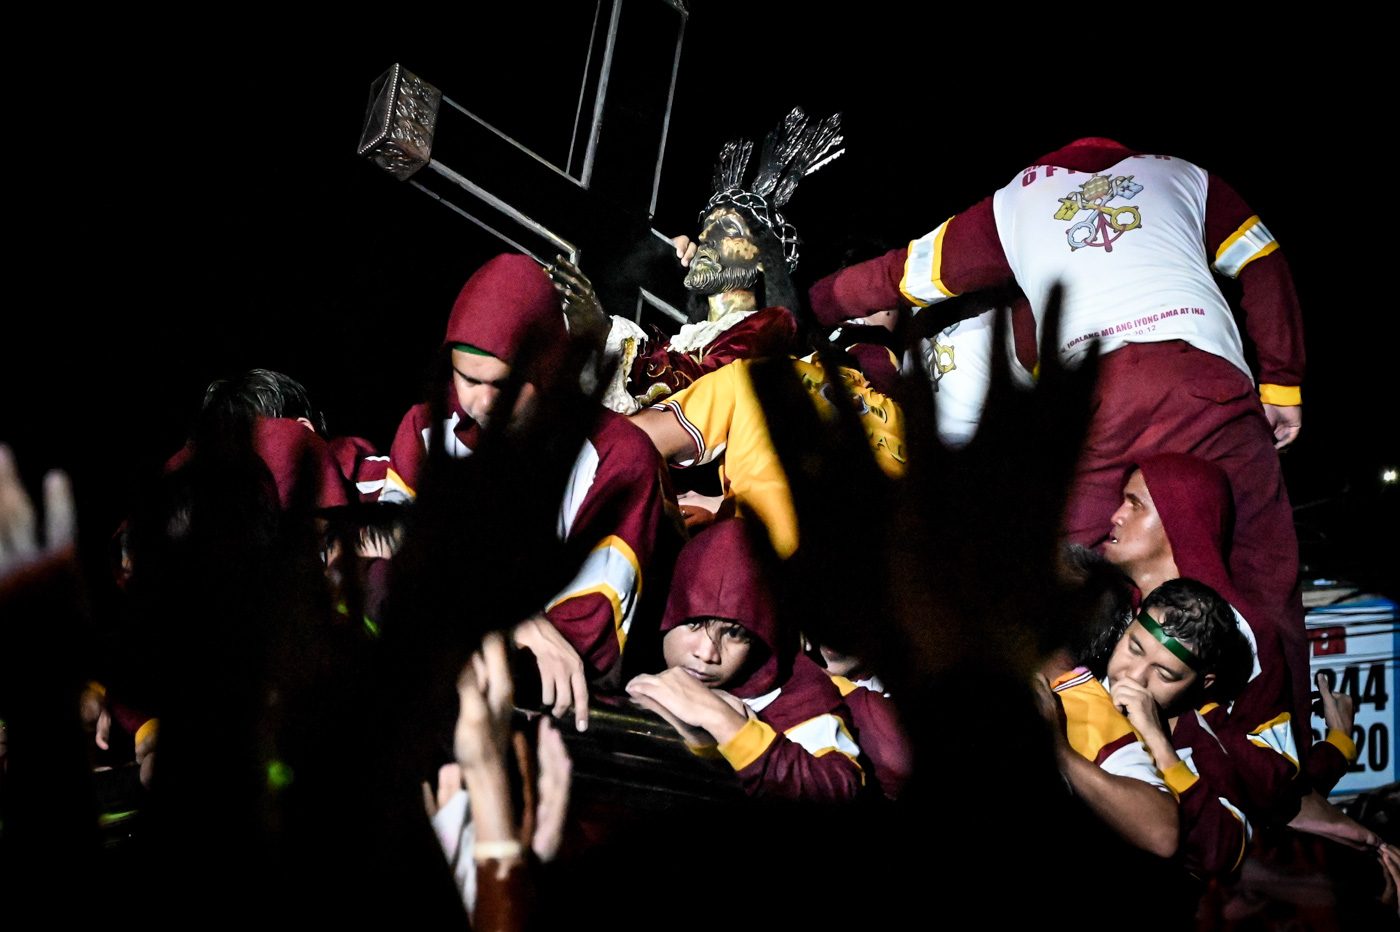 Black Nazarene back in Quiapo Church after 21 hours